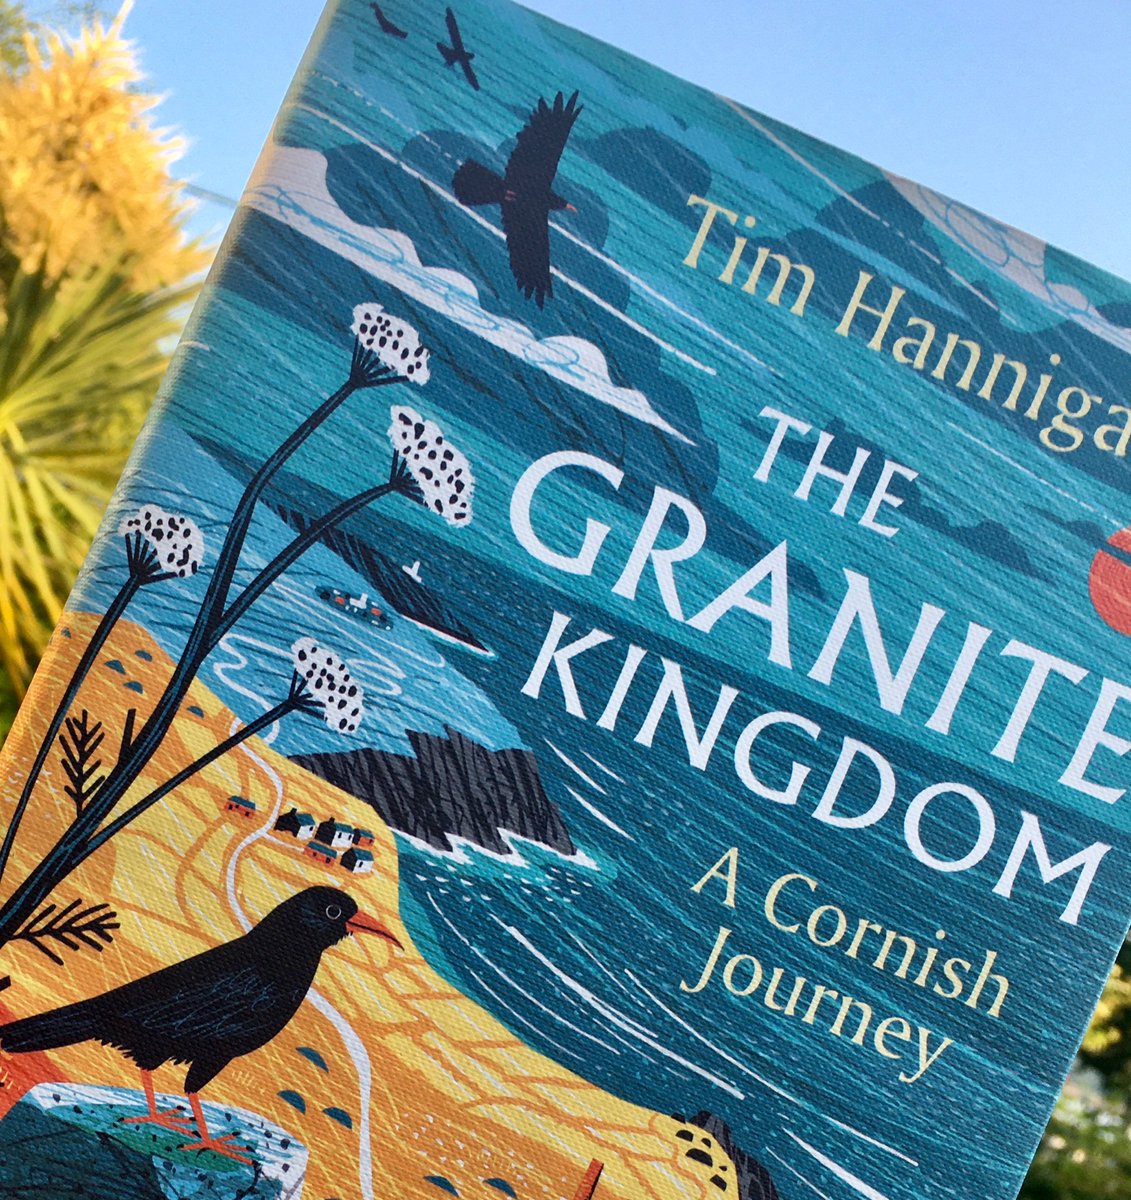 Really engrossed in @Tim_Hannigan #thegranitekingdom as my mother’s family are dyed in the wool Cornish back to the 15th century around Falmouth. Tregaskes - but latterly from Bude which is very ‘un Cornish’ but Cornish!! 
Fascinating.